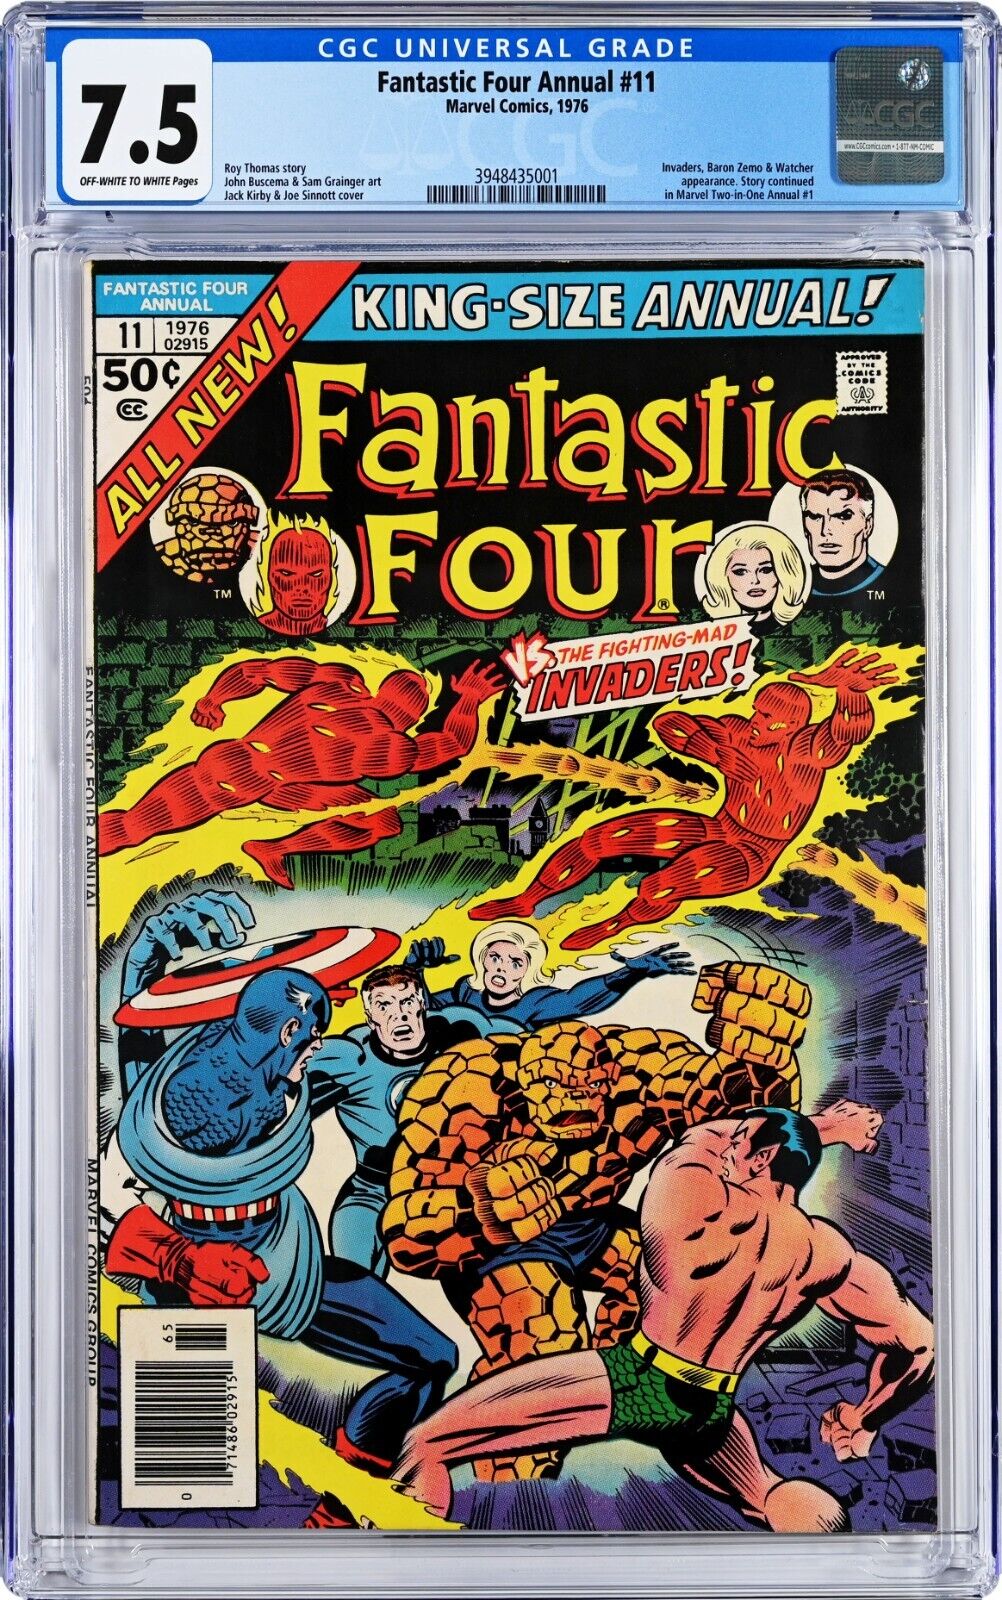 Fantastic Four Annual #11 CGC 7.5 (1976, Marvel) Jack Kirby Cover, Invaders app.